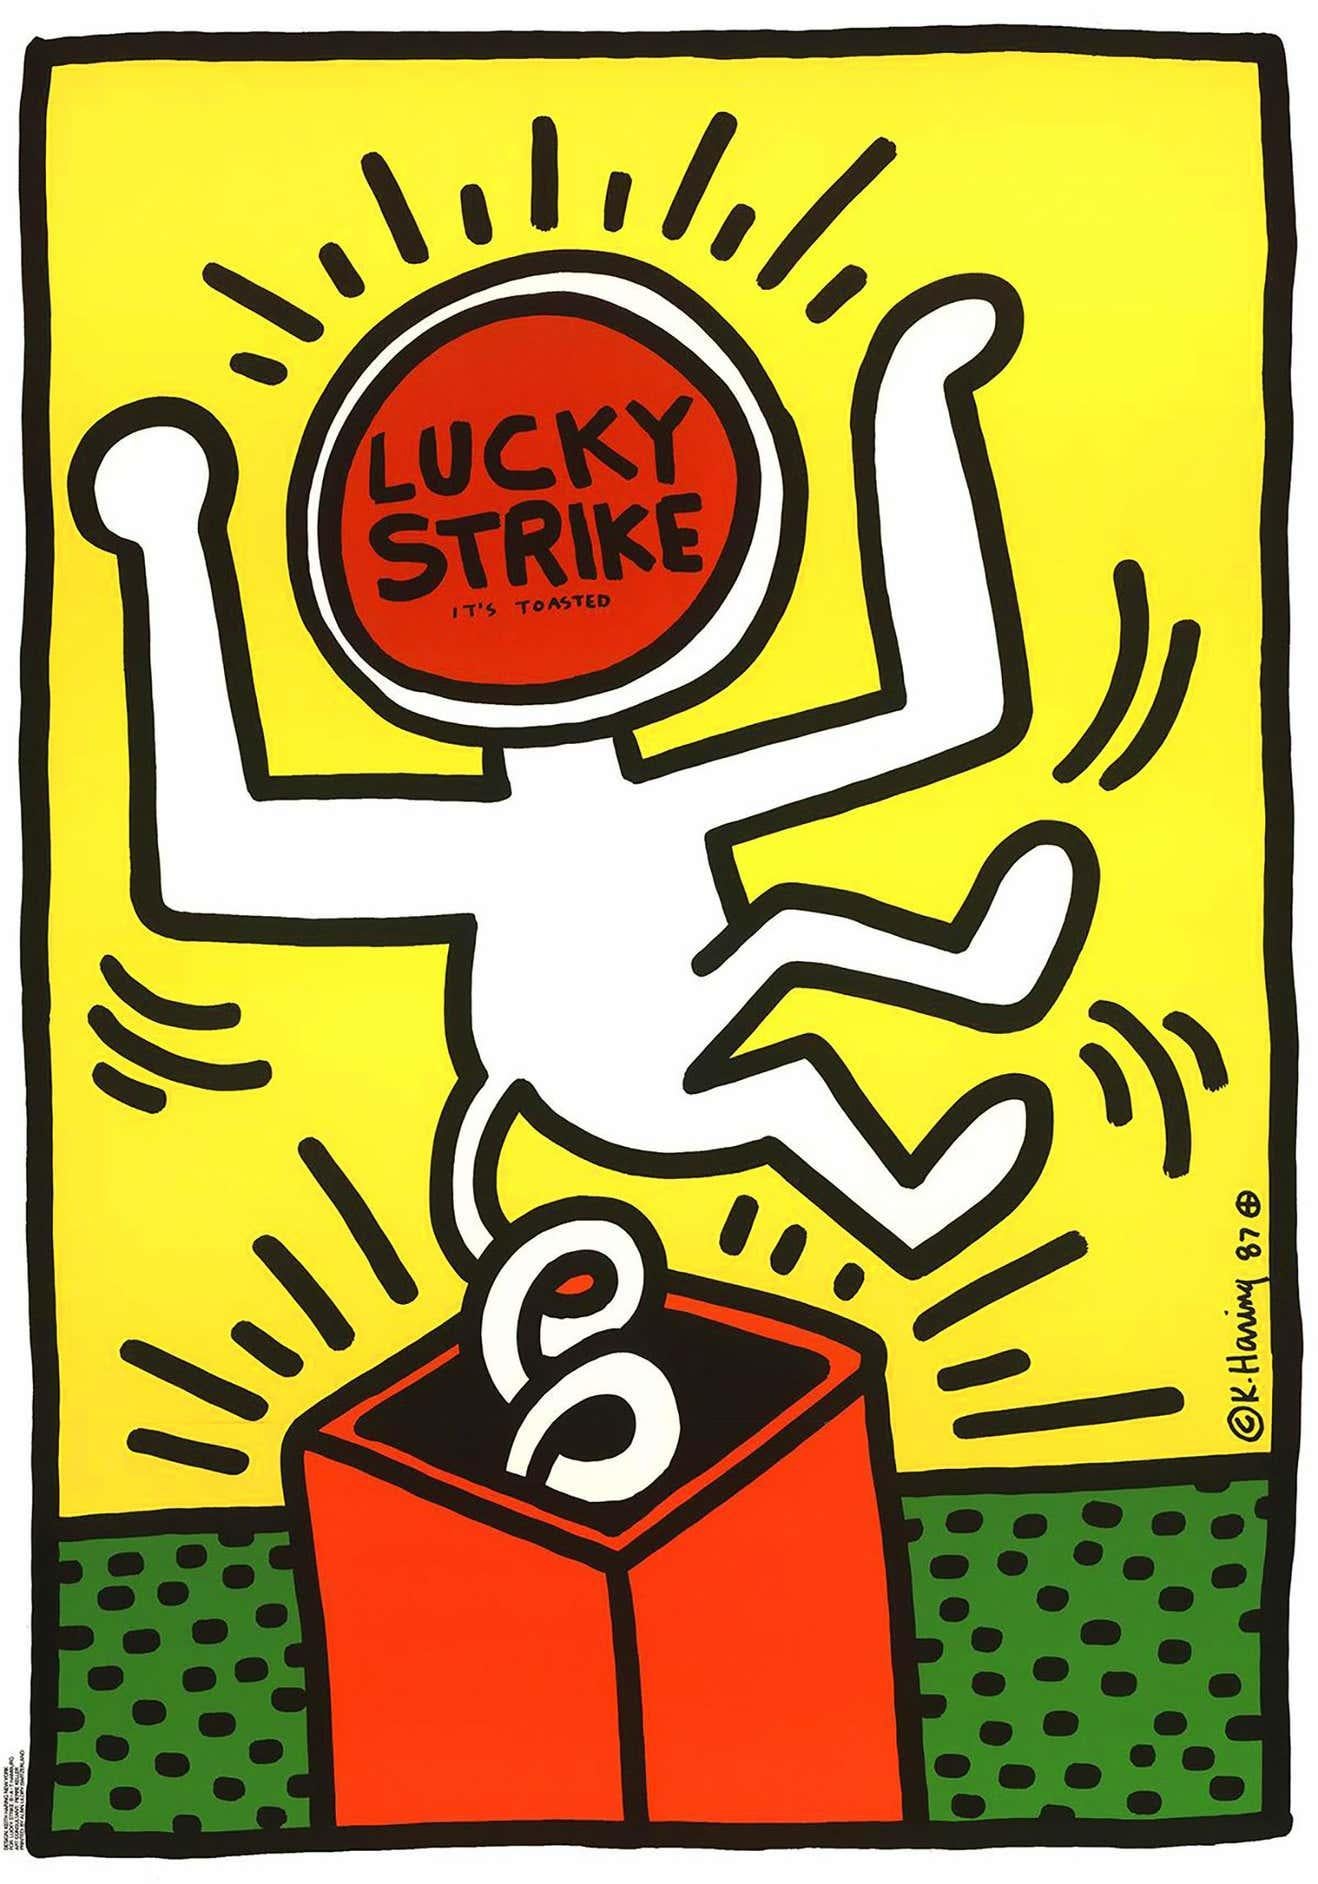 Keith Haring Lucky Strike poster 1987:
Vintage original 1980s Keith Haring poster designed & illustrated by Haring on behalf of the long-time cigarette brand, Lucky Strike. Catalog Raisonne: Keith Haring: Posters (Prestel publishing). A rare example